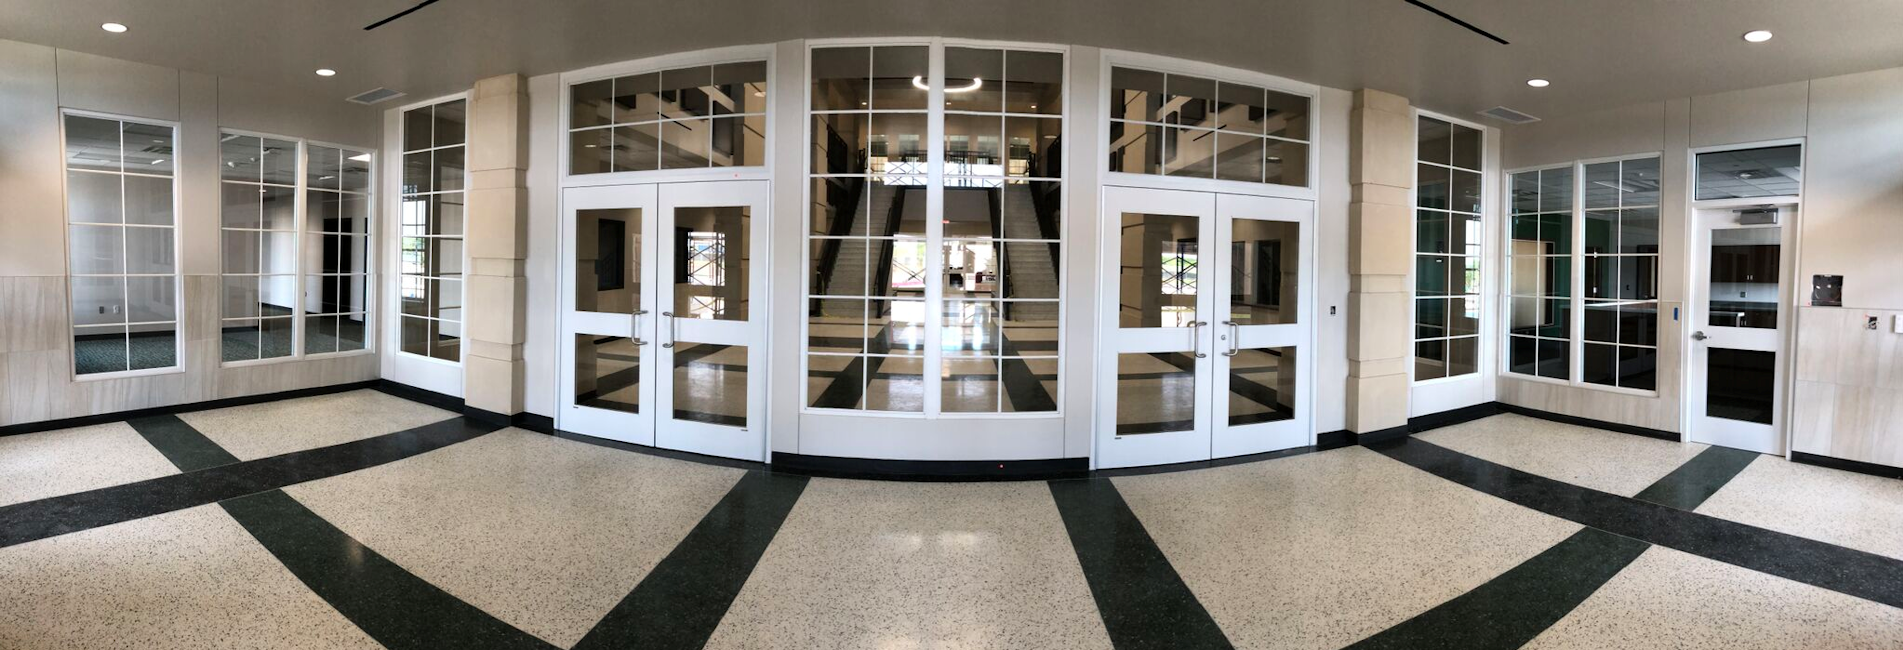 Custom Glass Installer Southlake Texas Dallas Fort Worth Glass & Mirror Installation | Residential Glass | Commercial Glass & Glazing | AB Glass &